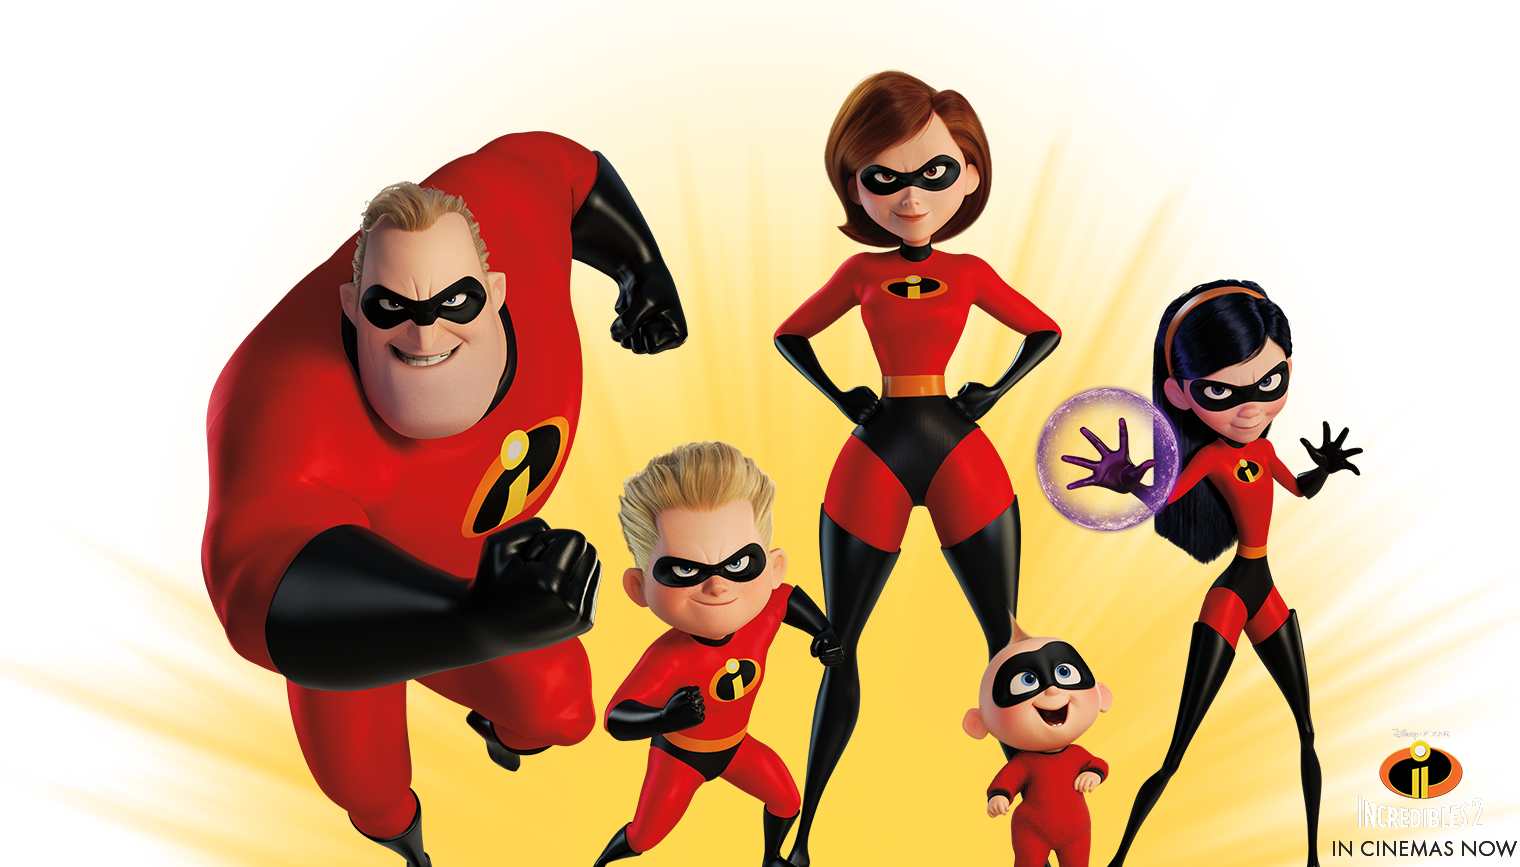 Incredibles 2 for windows instal free